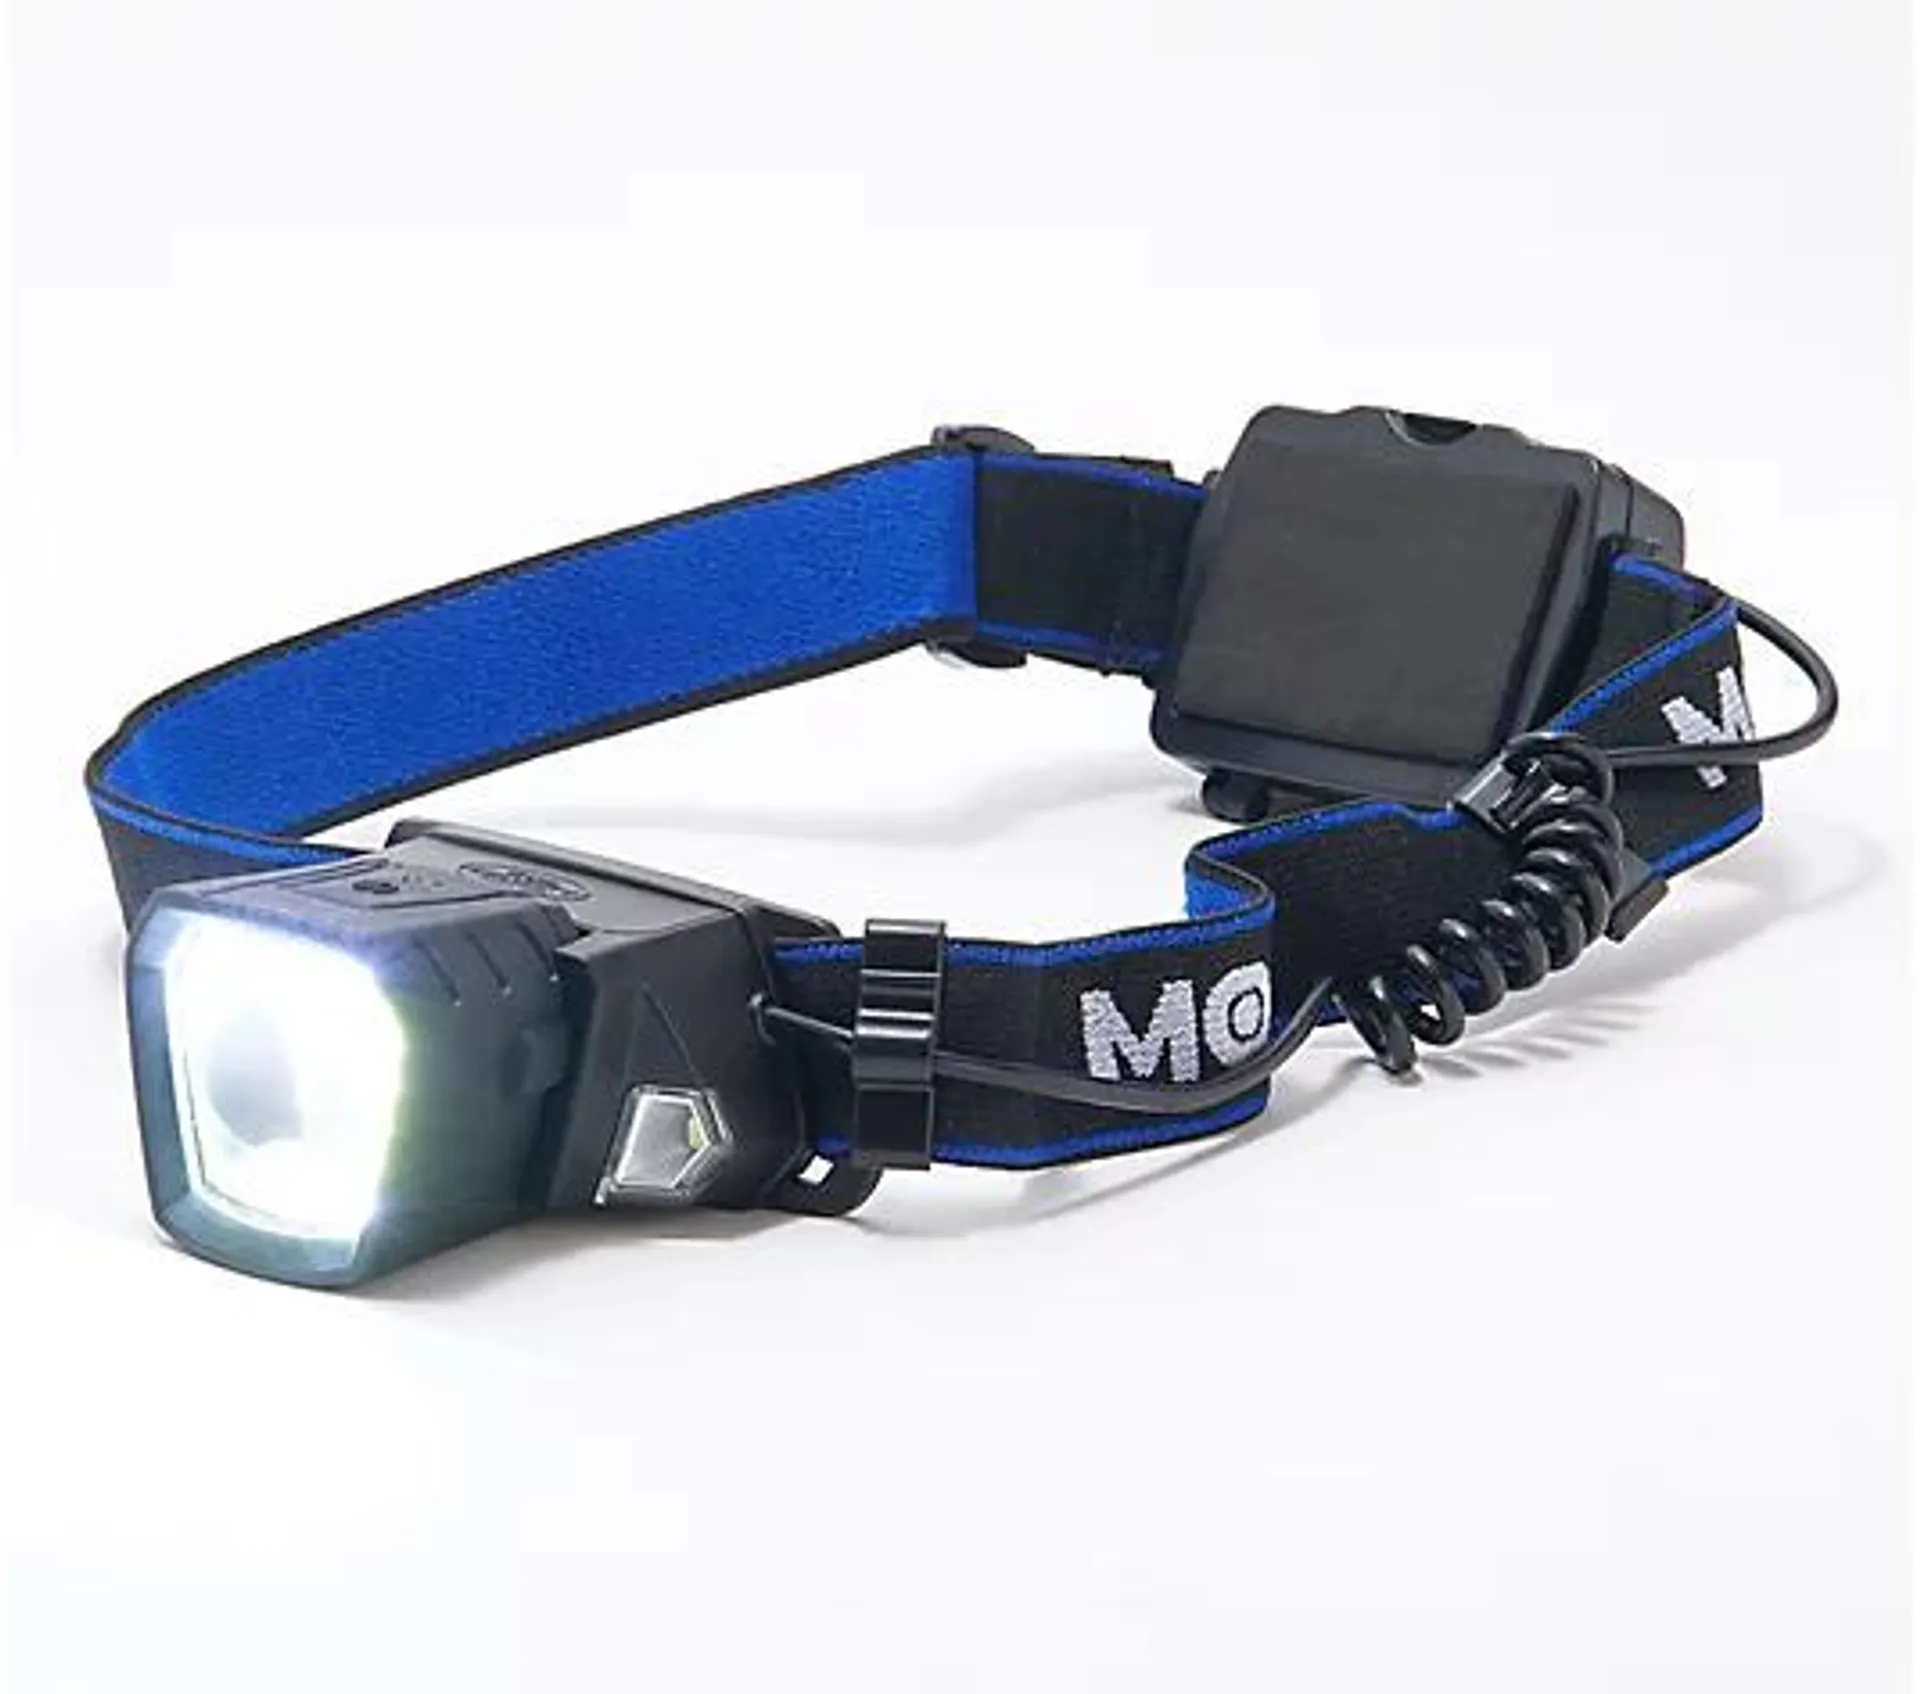 MORF R230 3-in-1 Headlamp by Police Security Flashlights